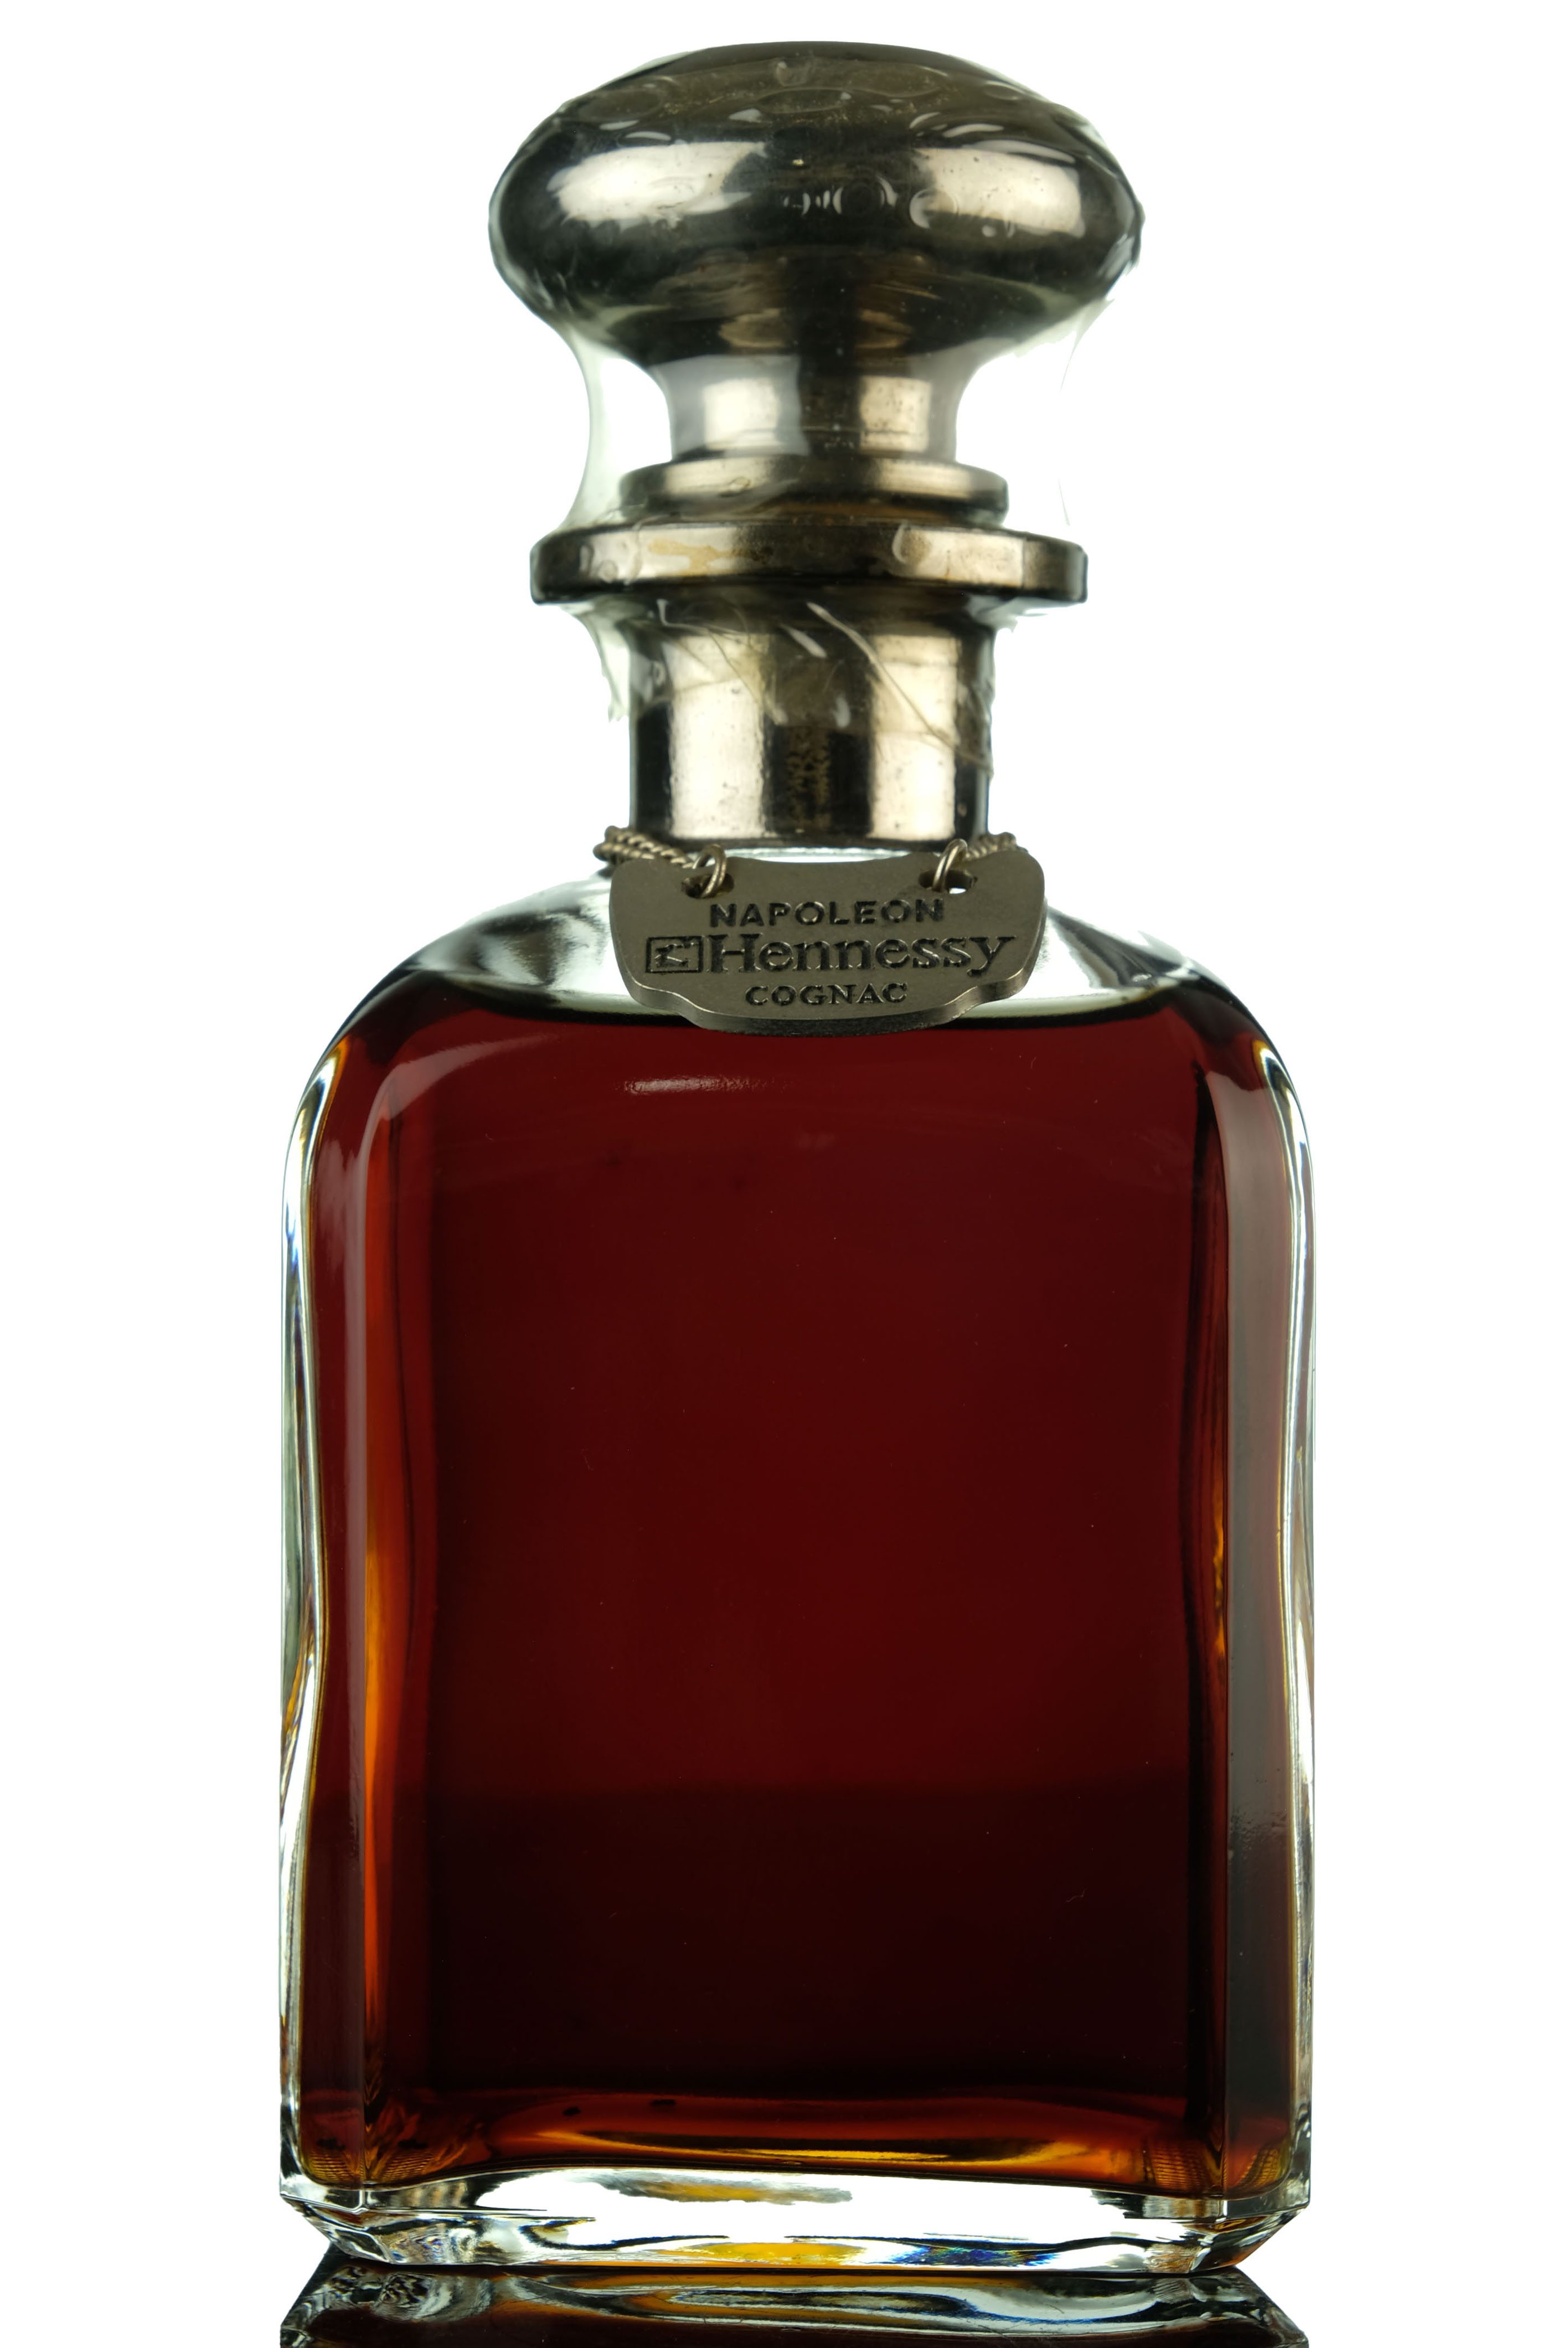 Hennessy Napoleon Cognac - Silver Top Library Decanter - 1980s